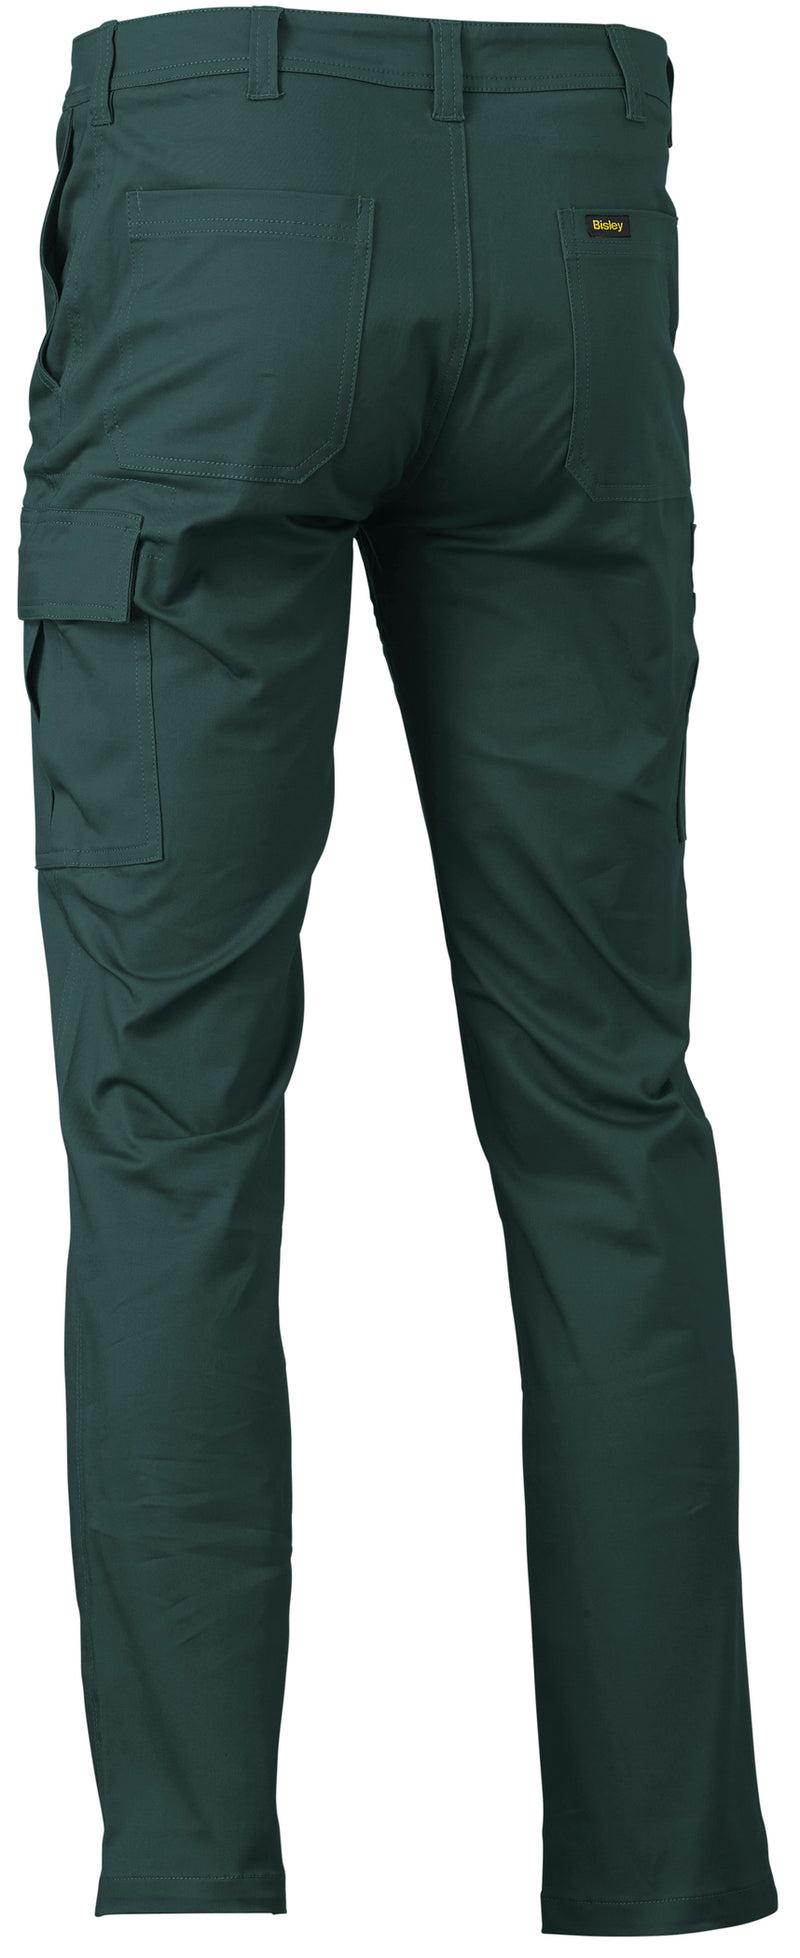 Load image into Gallery viewer, Wholesale BPC6008 Bisley Stretch Cotton Drill Cargo Pants - Stout Printed or Blank
